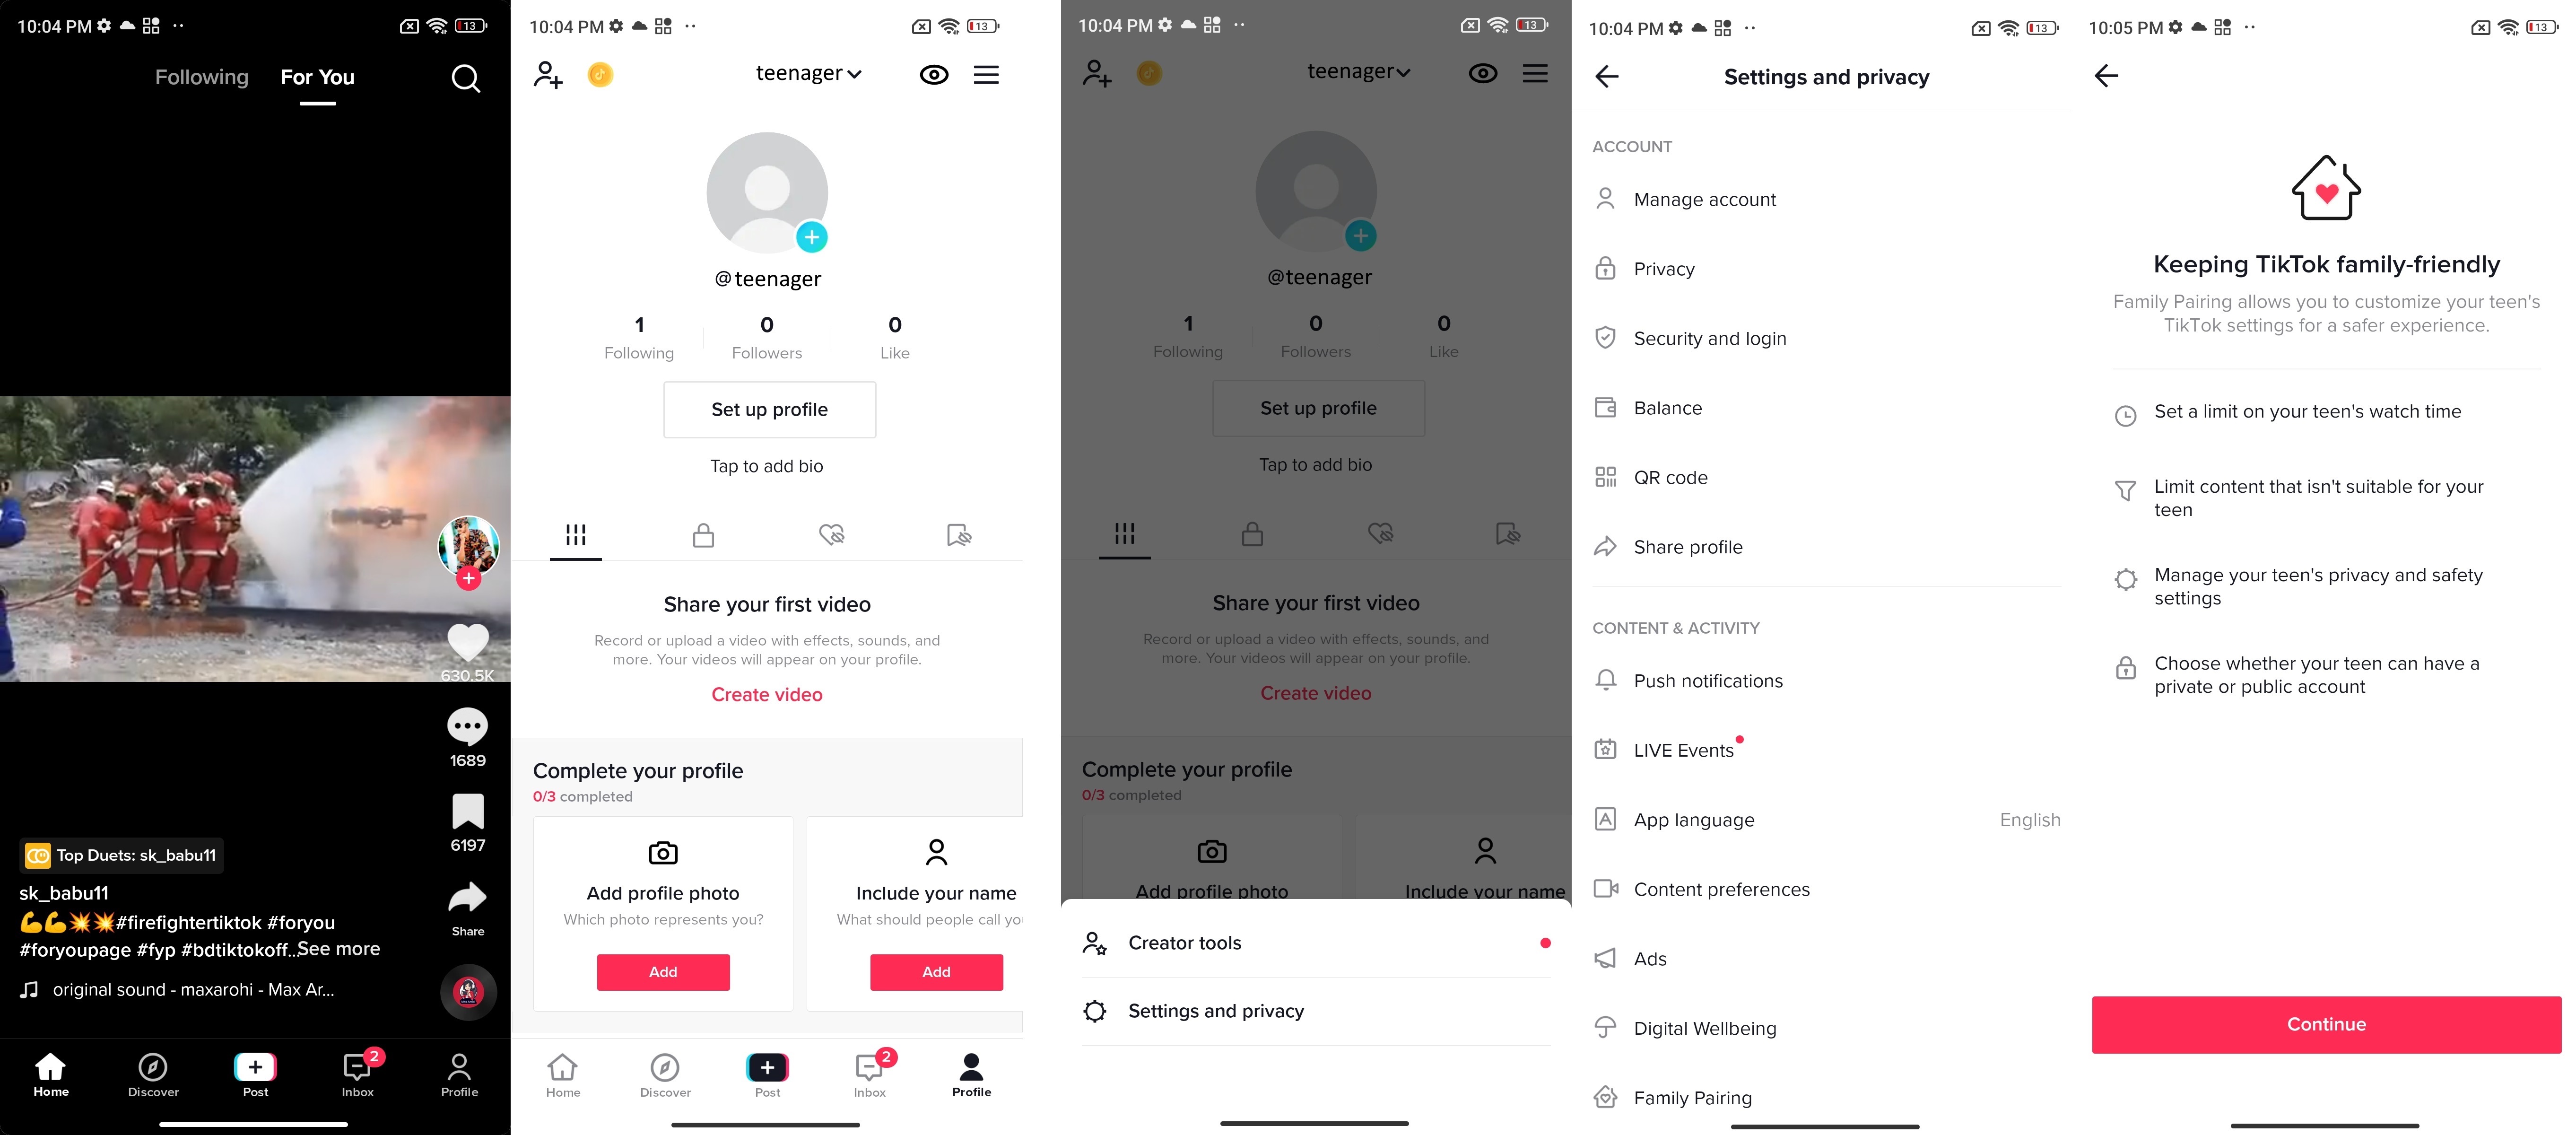 How to set up and manage TikTok Family Pairing